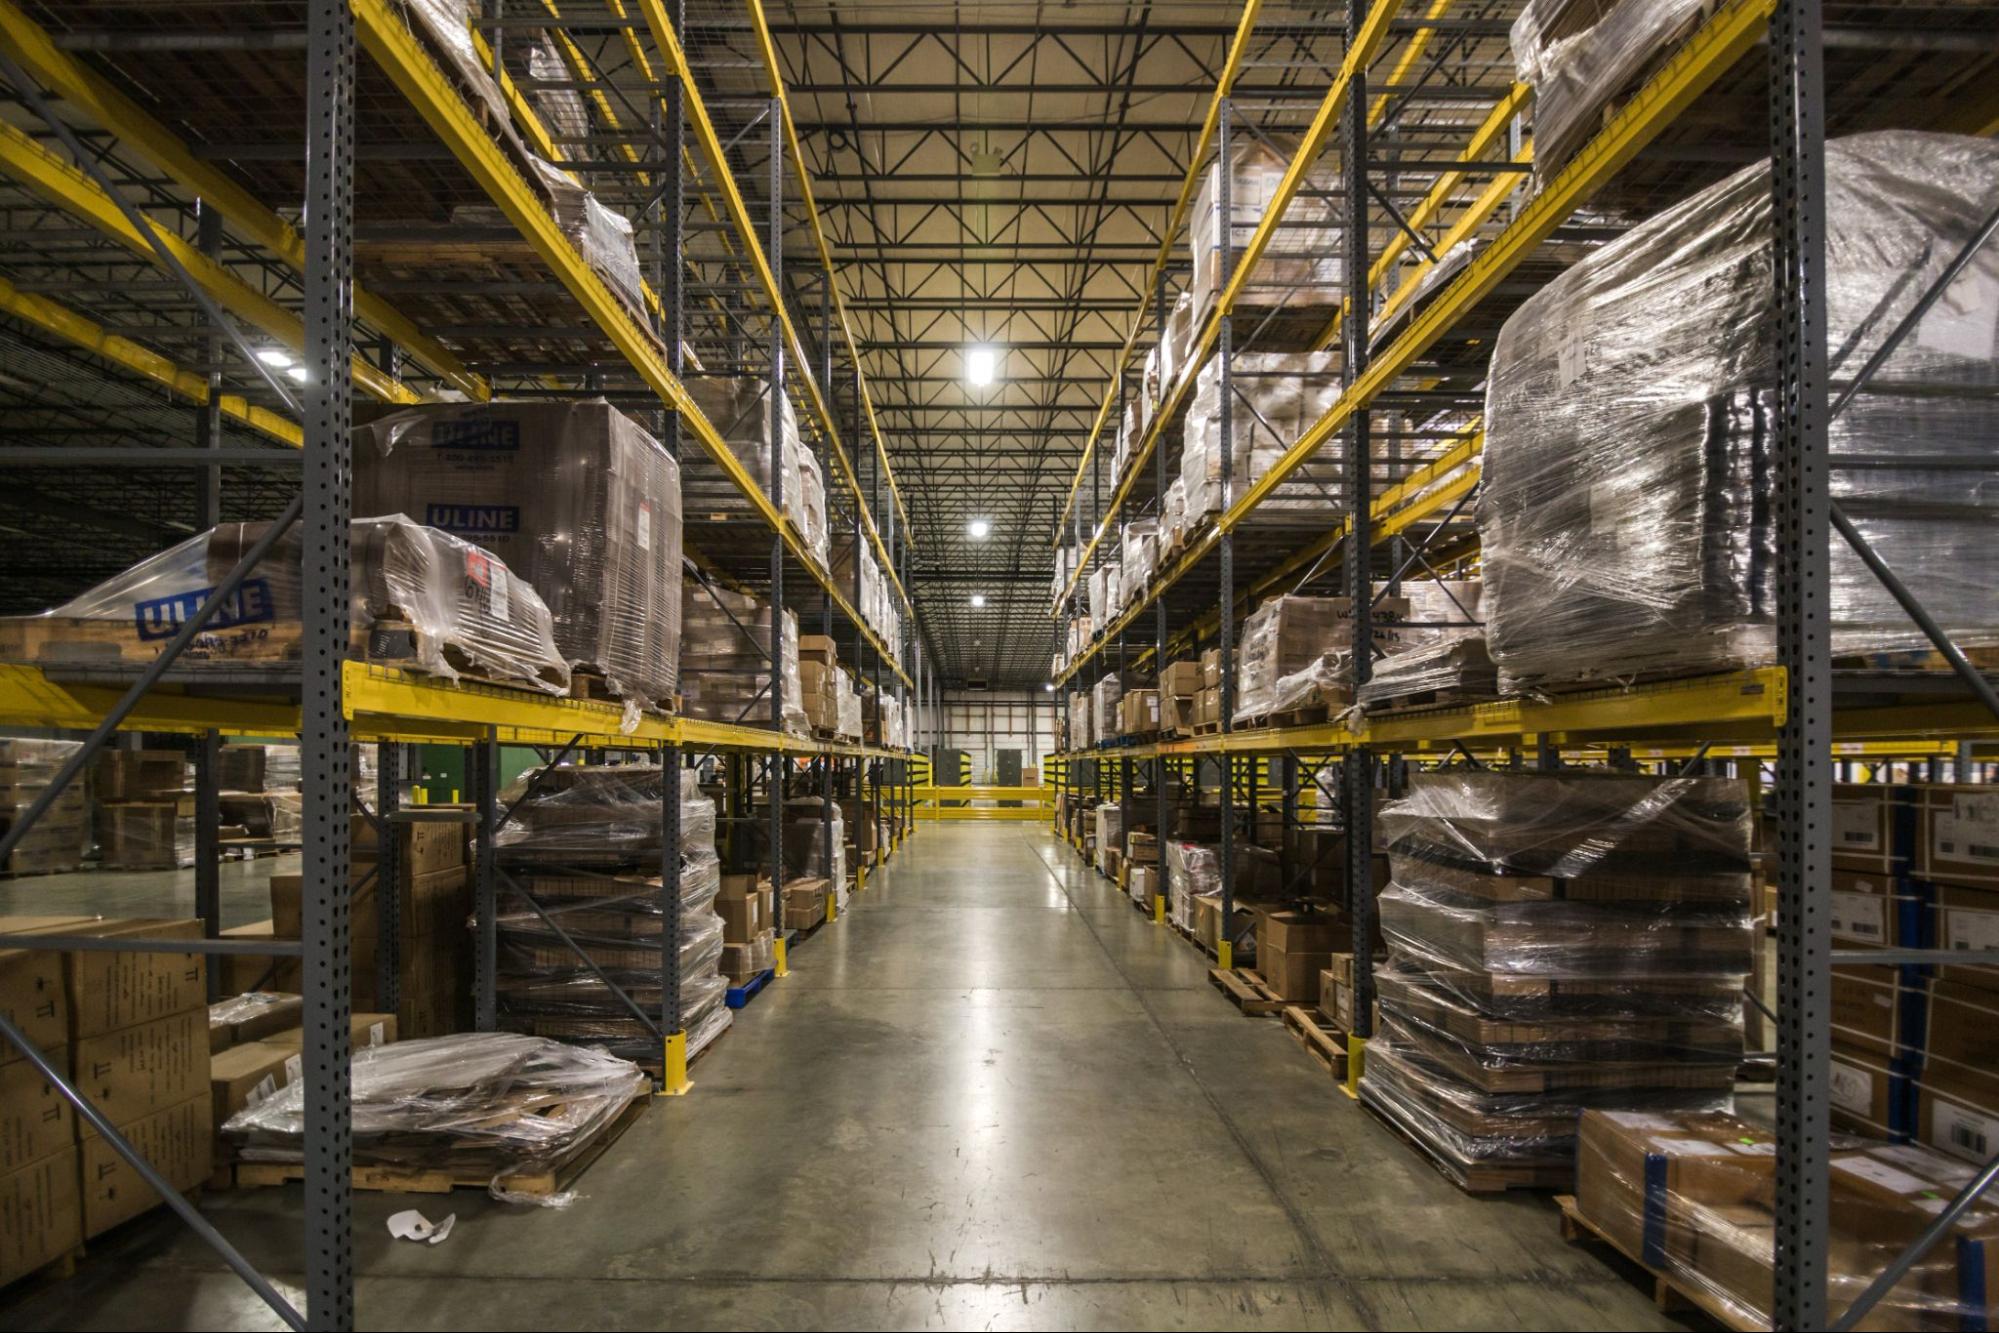 A large warehouse filled with floor-to-ceiling shelves containing pallets and boxes.